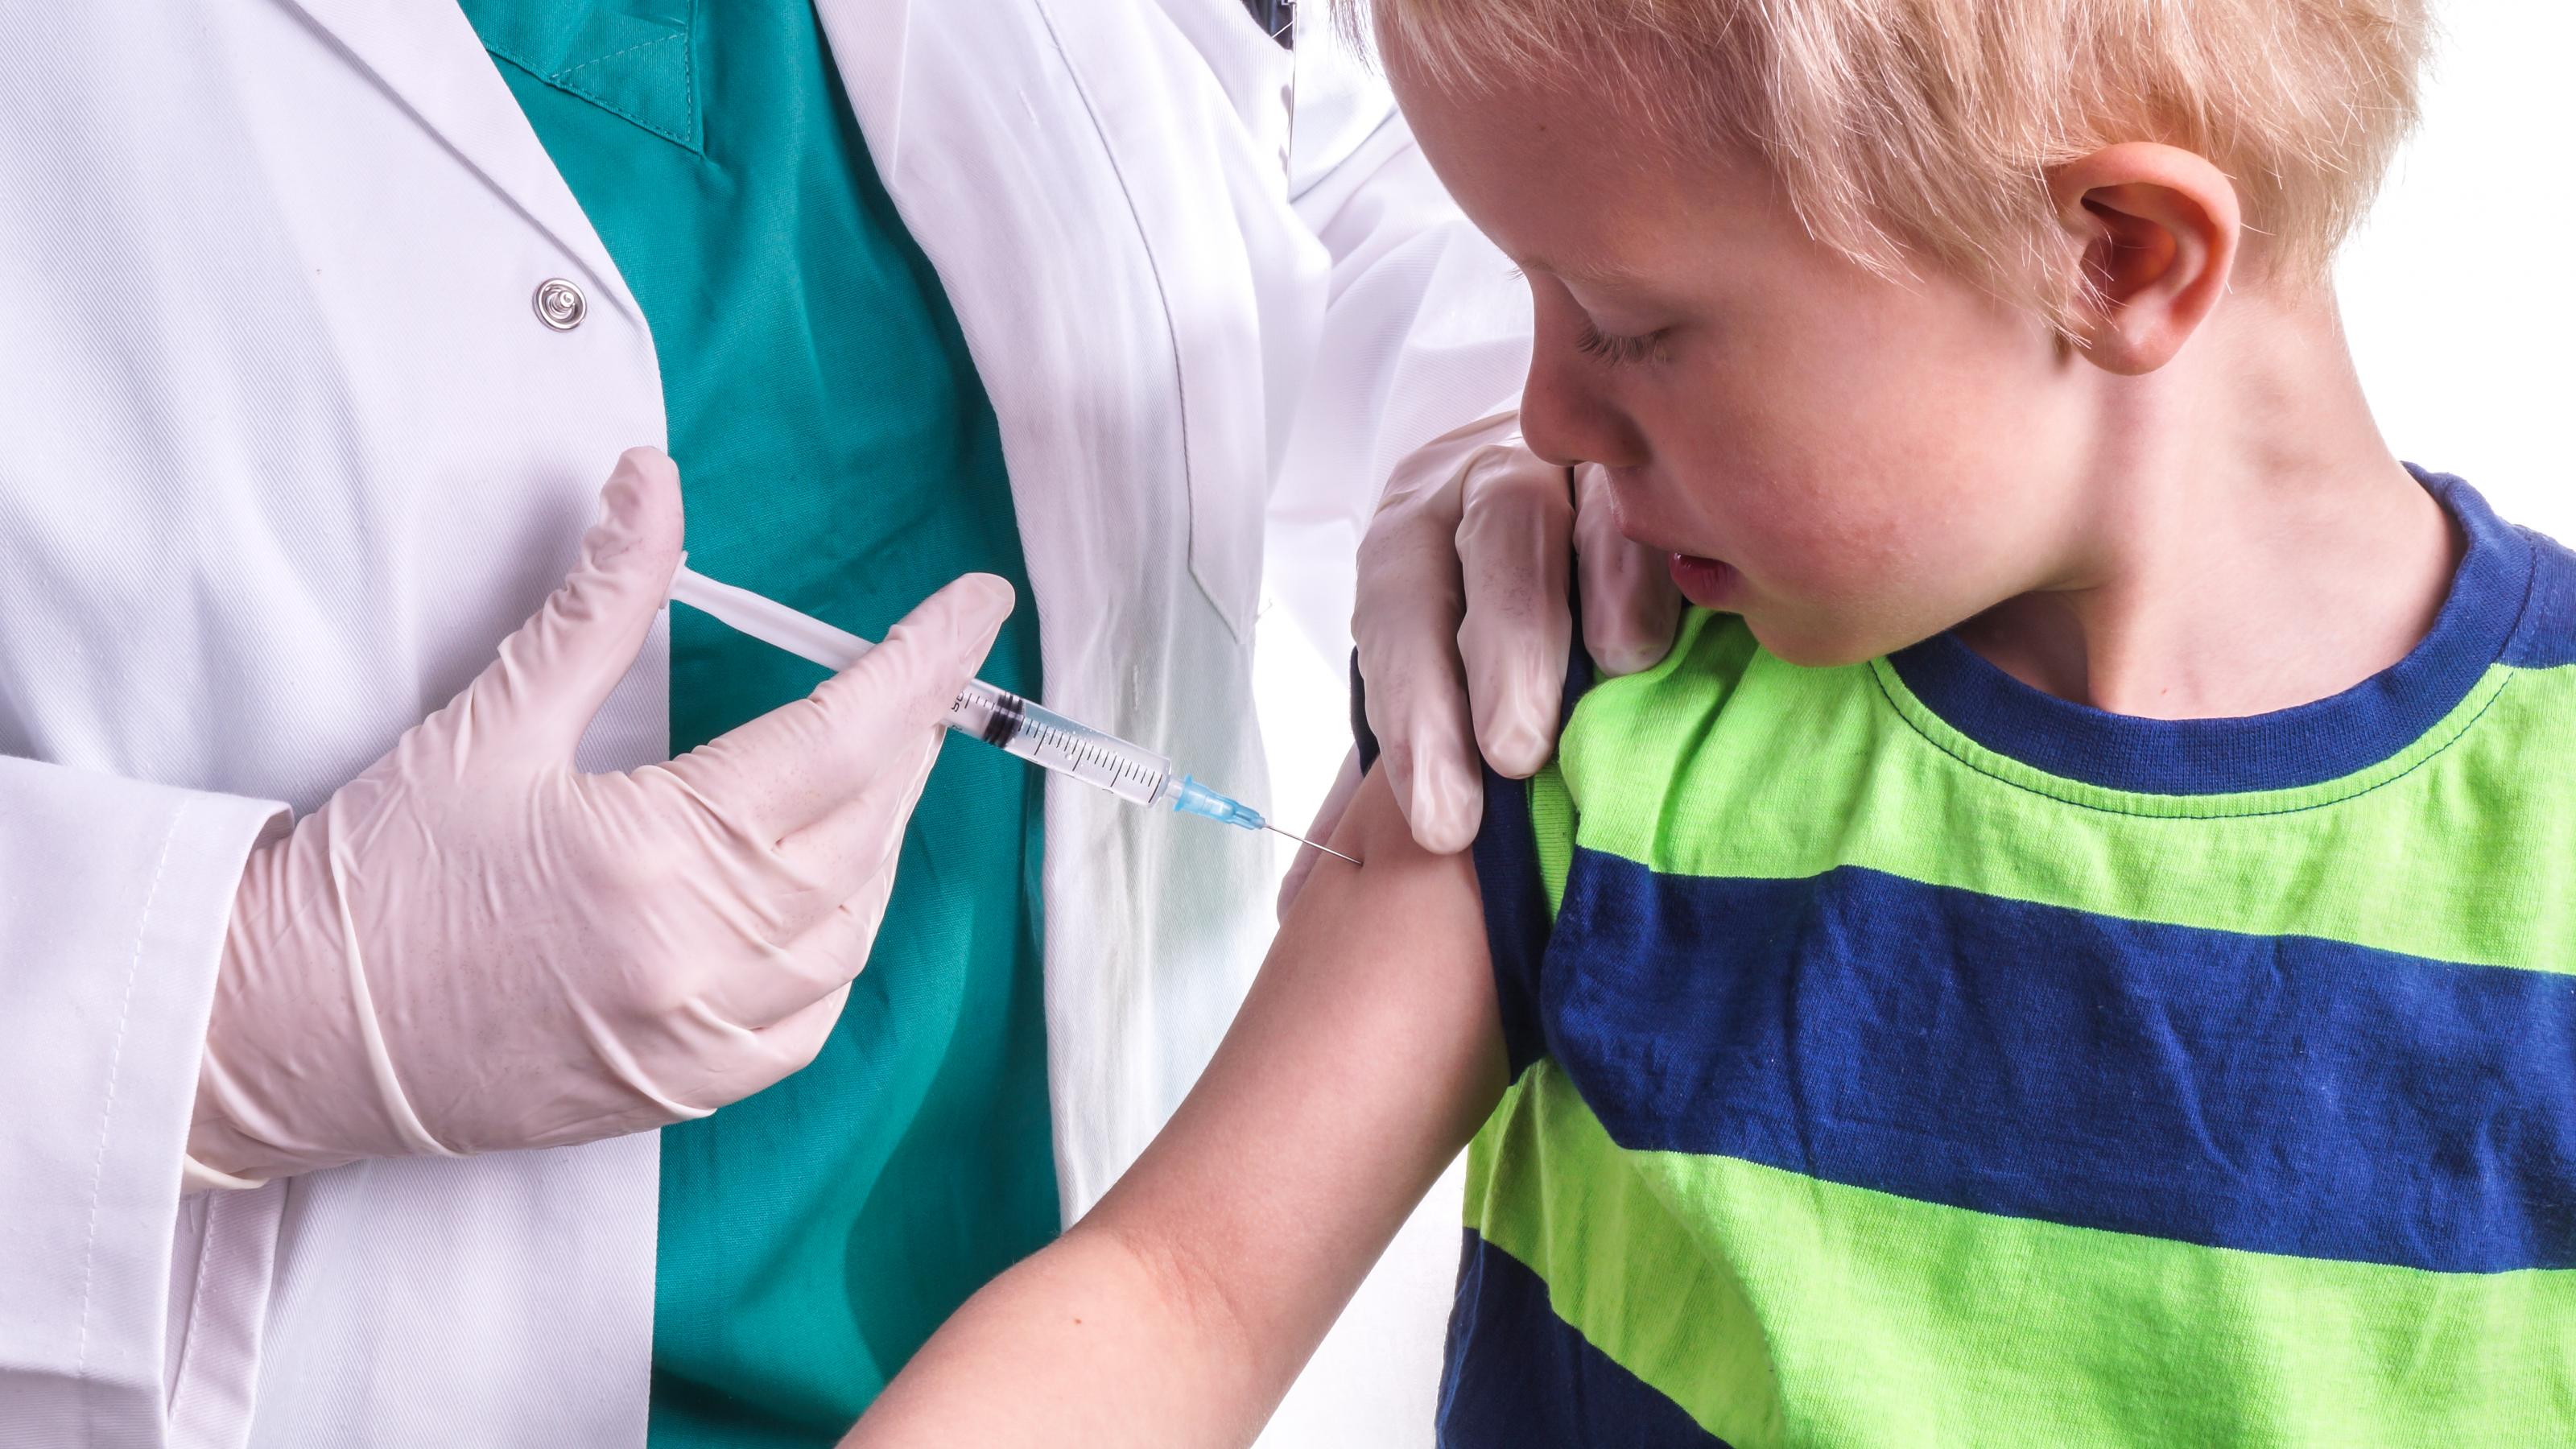 A young boy gets an injection with a syringe in his upper arm.